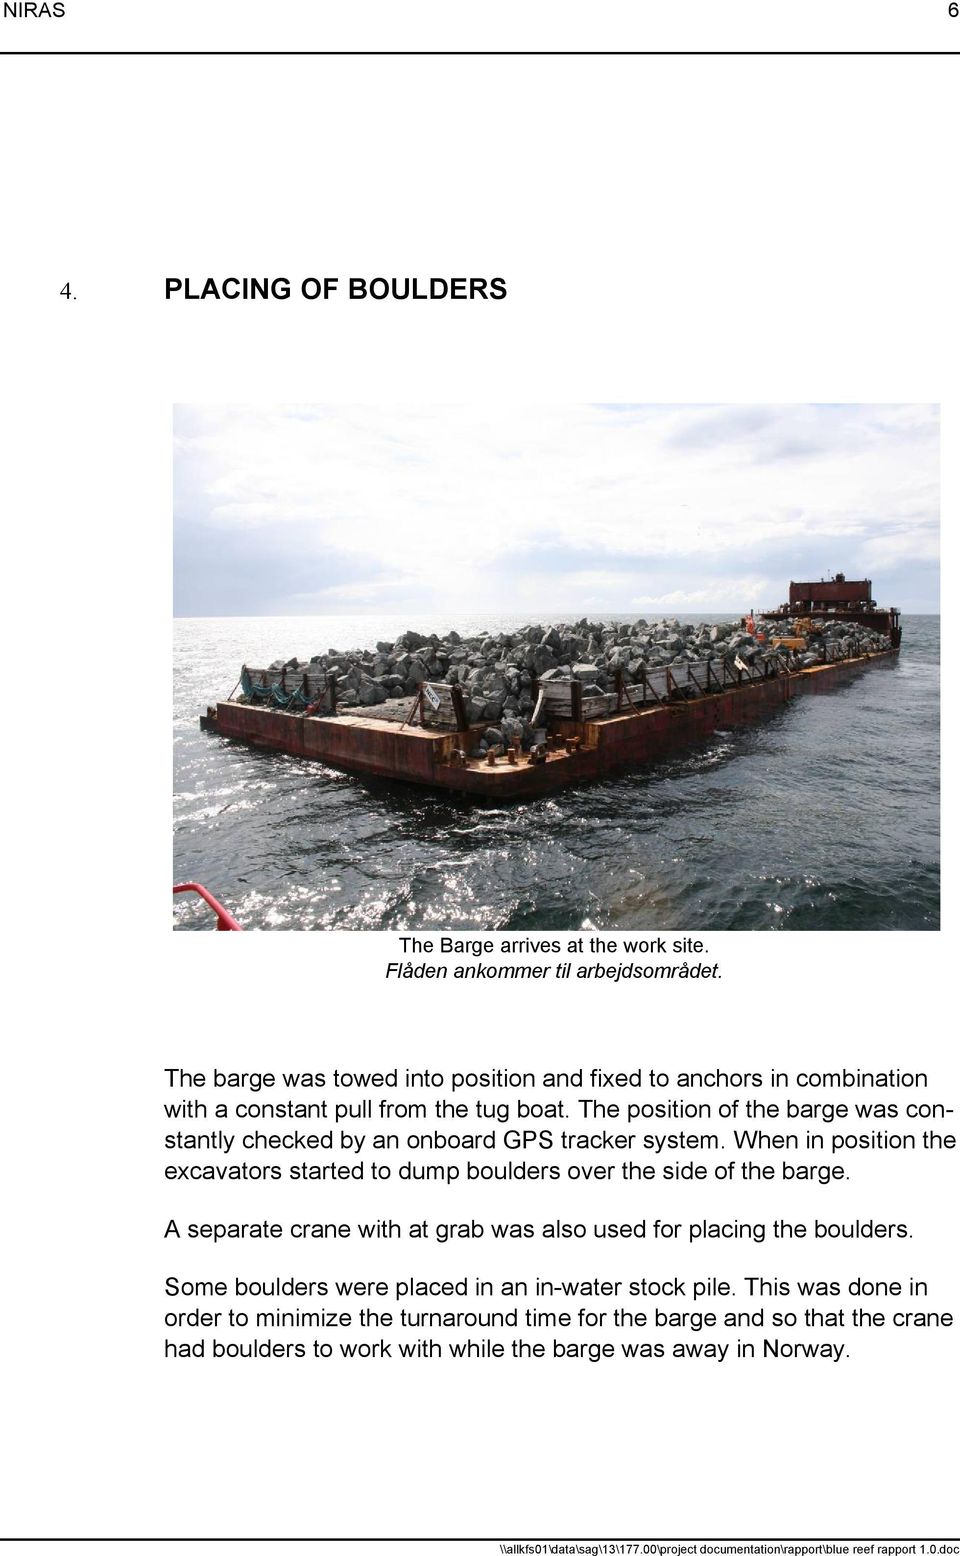 The position of the barge was constantly checked by an onboard GPS tracker system.